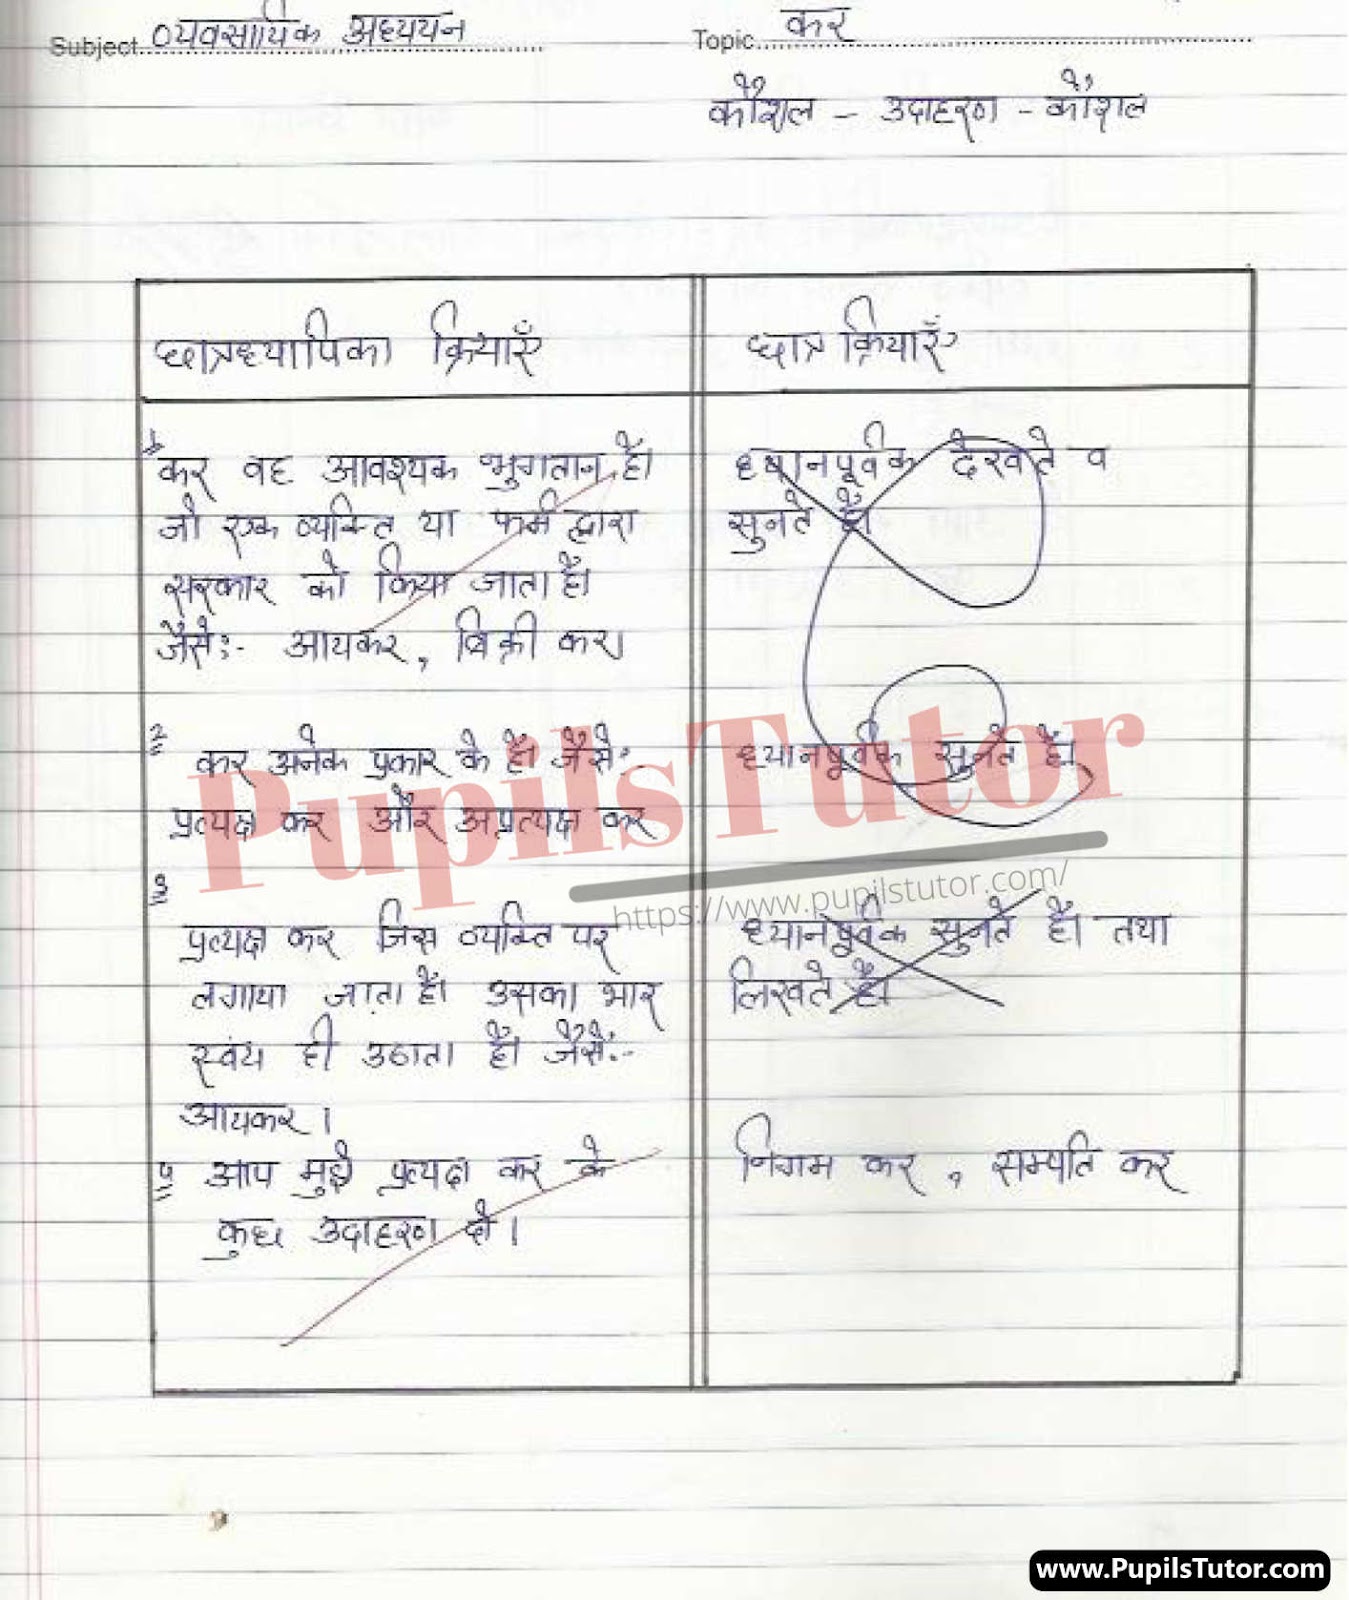 Kar Lesson Plan | Tax Lesson Plan In Hindi For Class 9 To 12 – (Page And Image Number 1) – Pupils Tutor